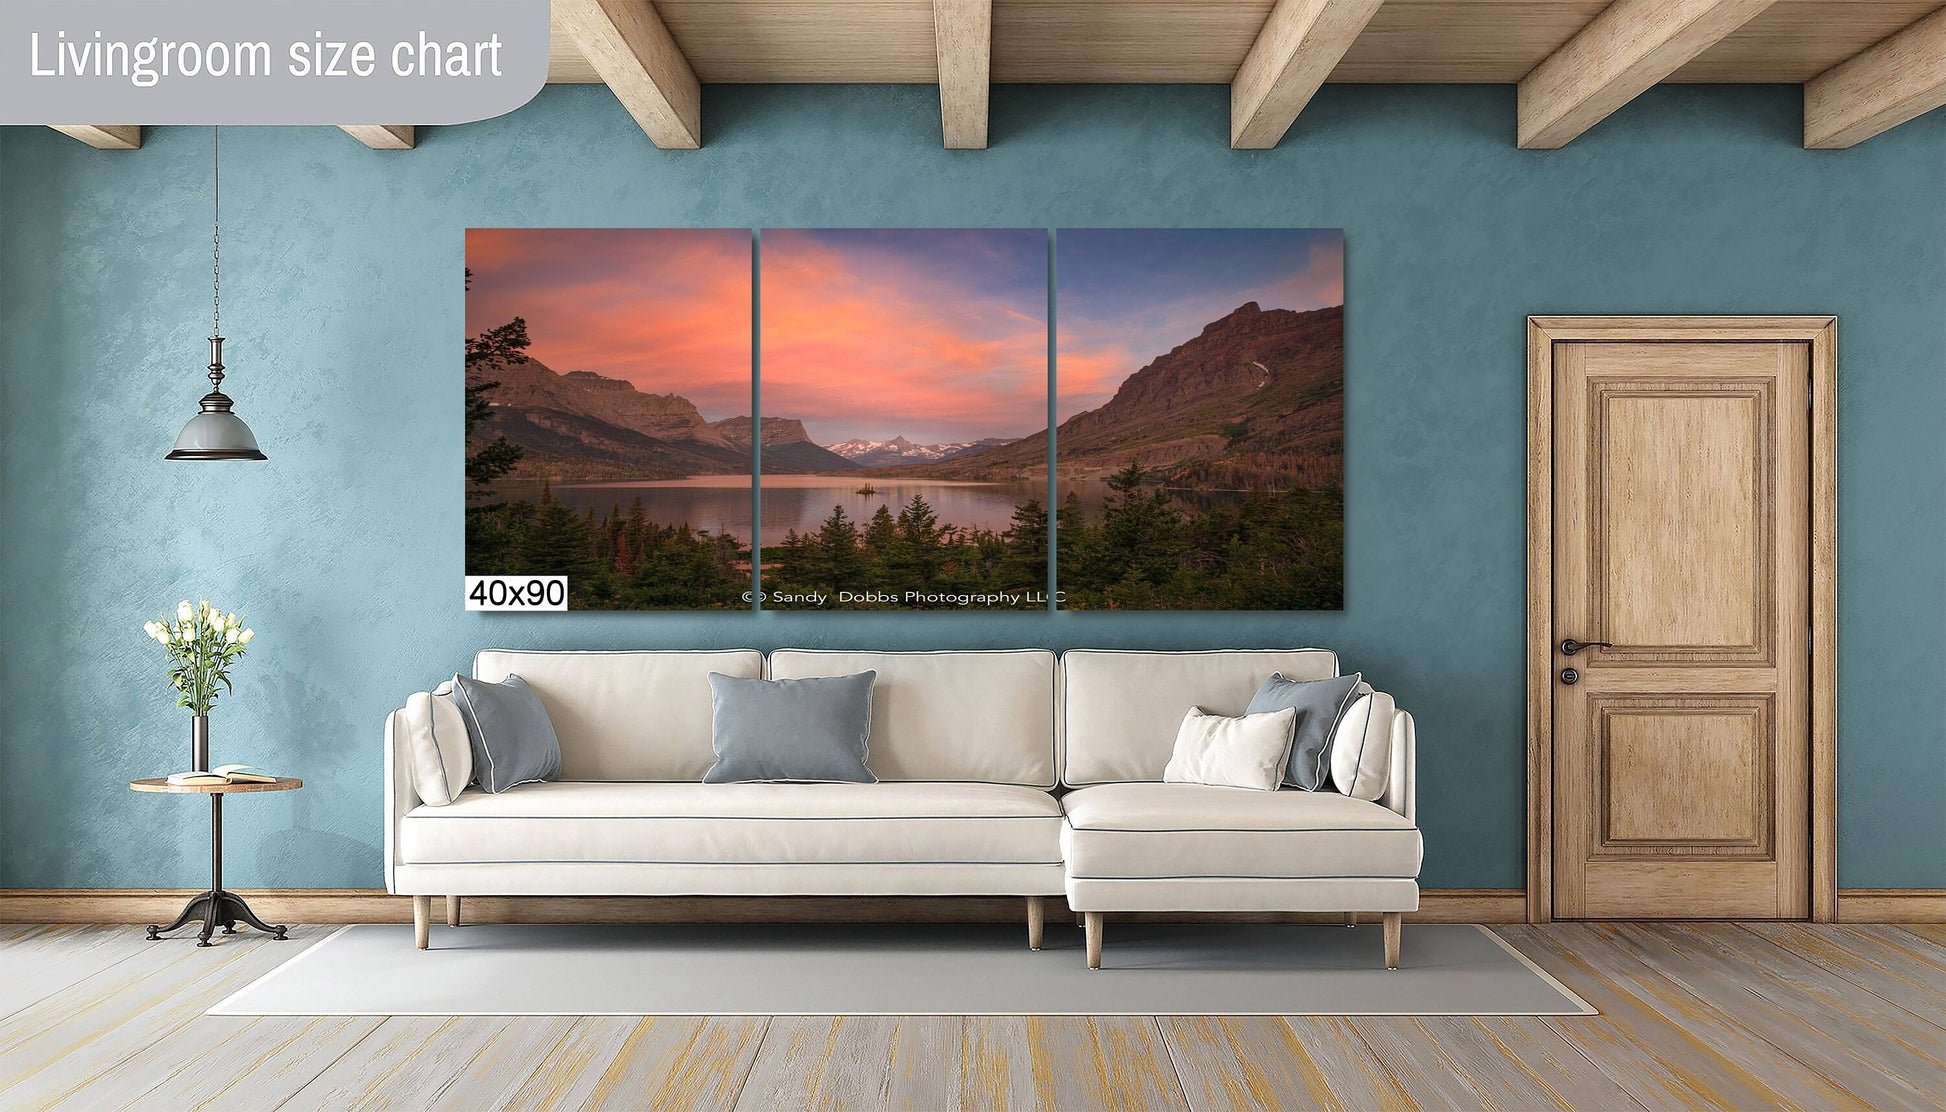 Glacier National Park,Sunrise at Goose Island St. Mary Lake,Montana Mountain Landscape,Canvas Wall Art Prints for Living Room,Bedroom